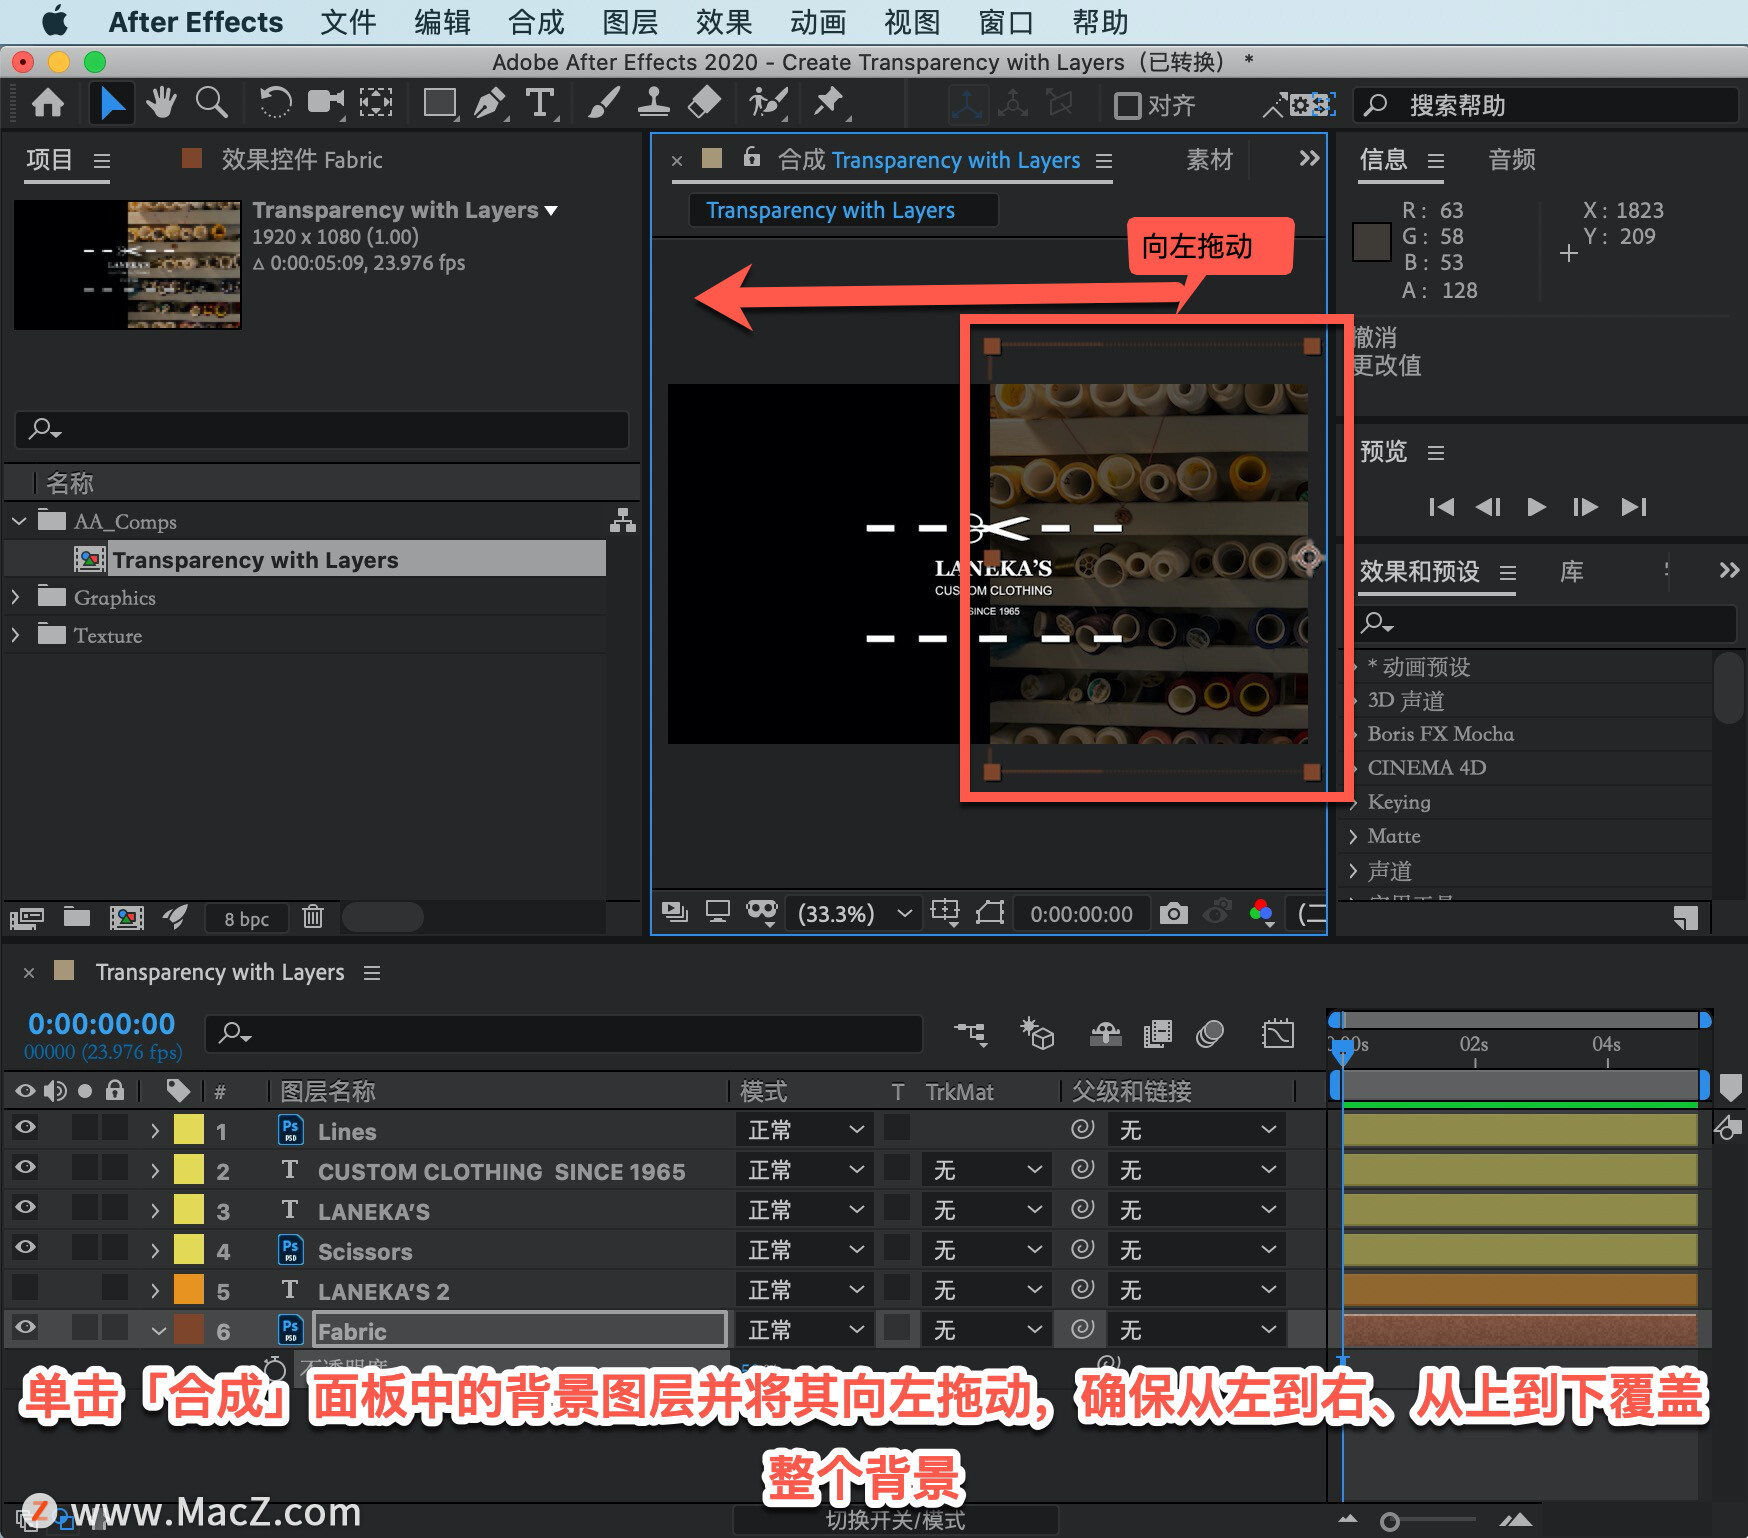 After Effects 教程「29」，如何在 After Effects 中设置图层不透明度？